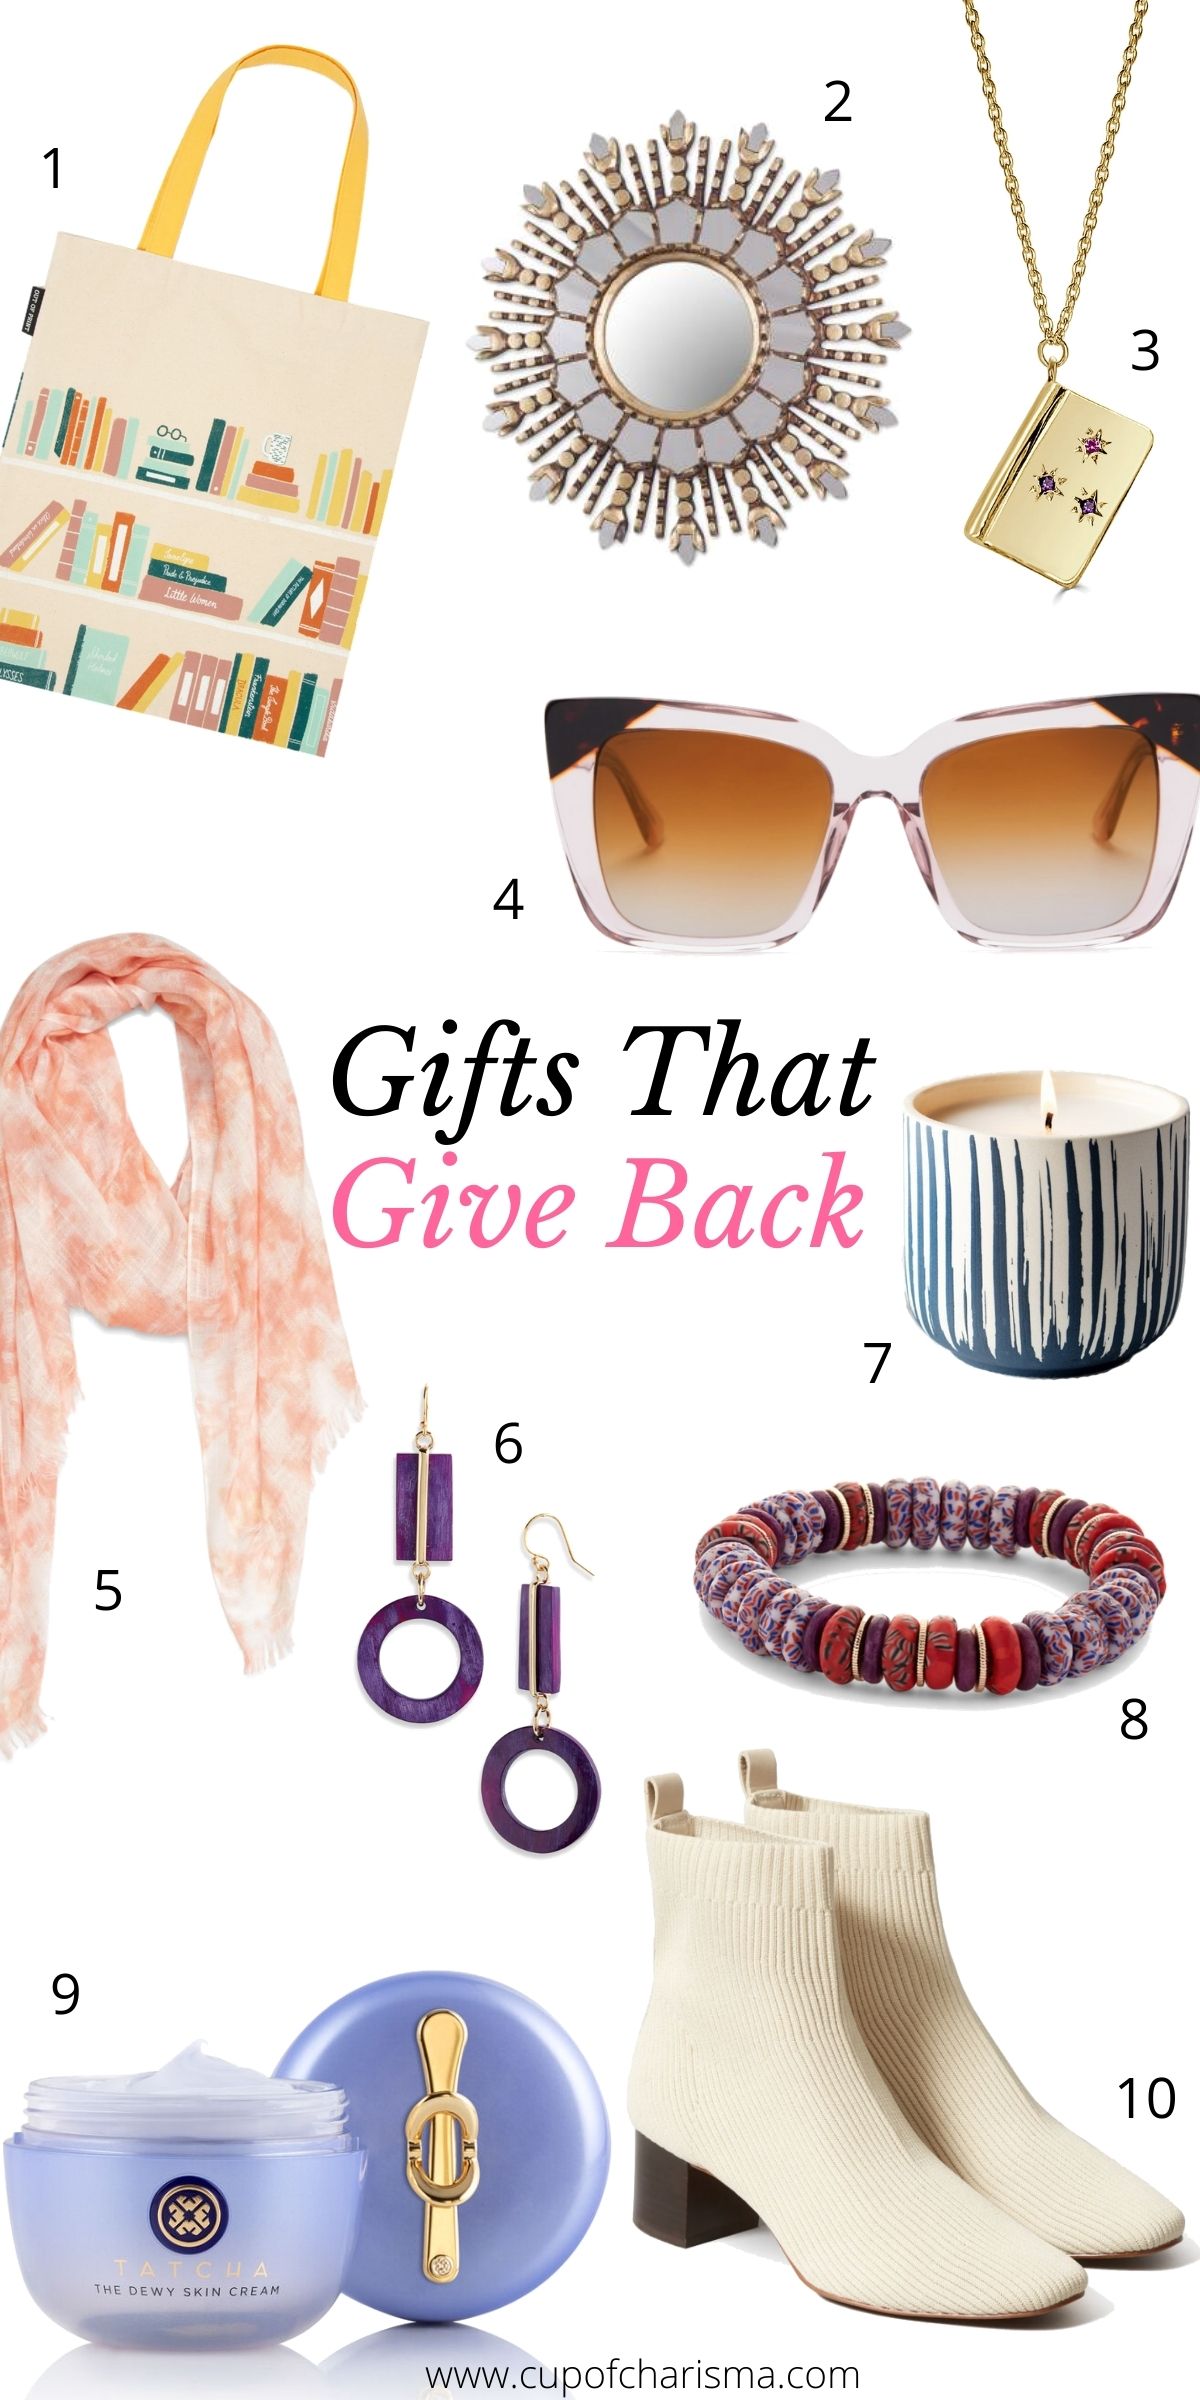 Where to Find Gifts That Give Back